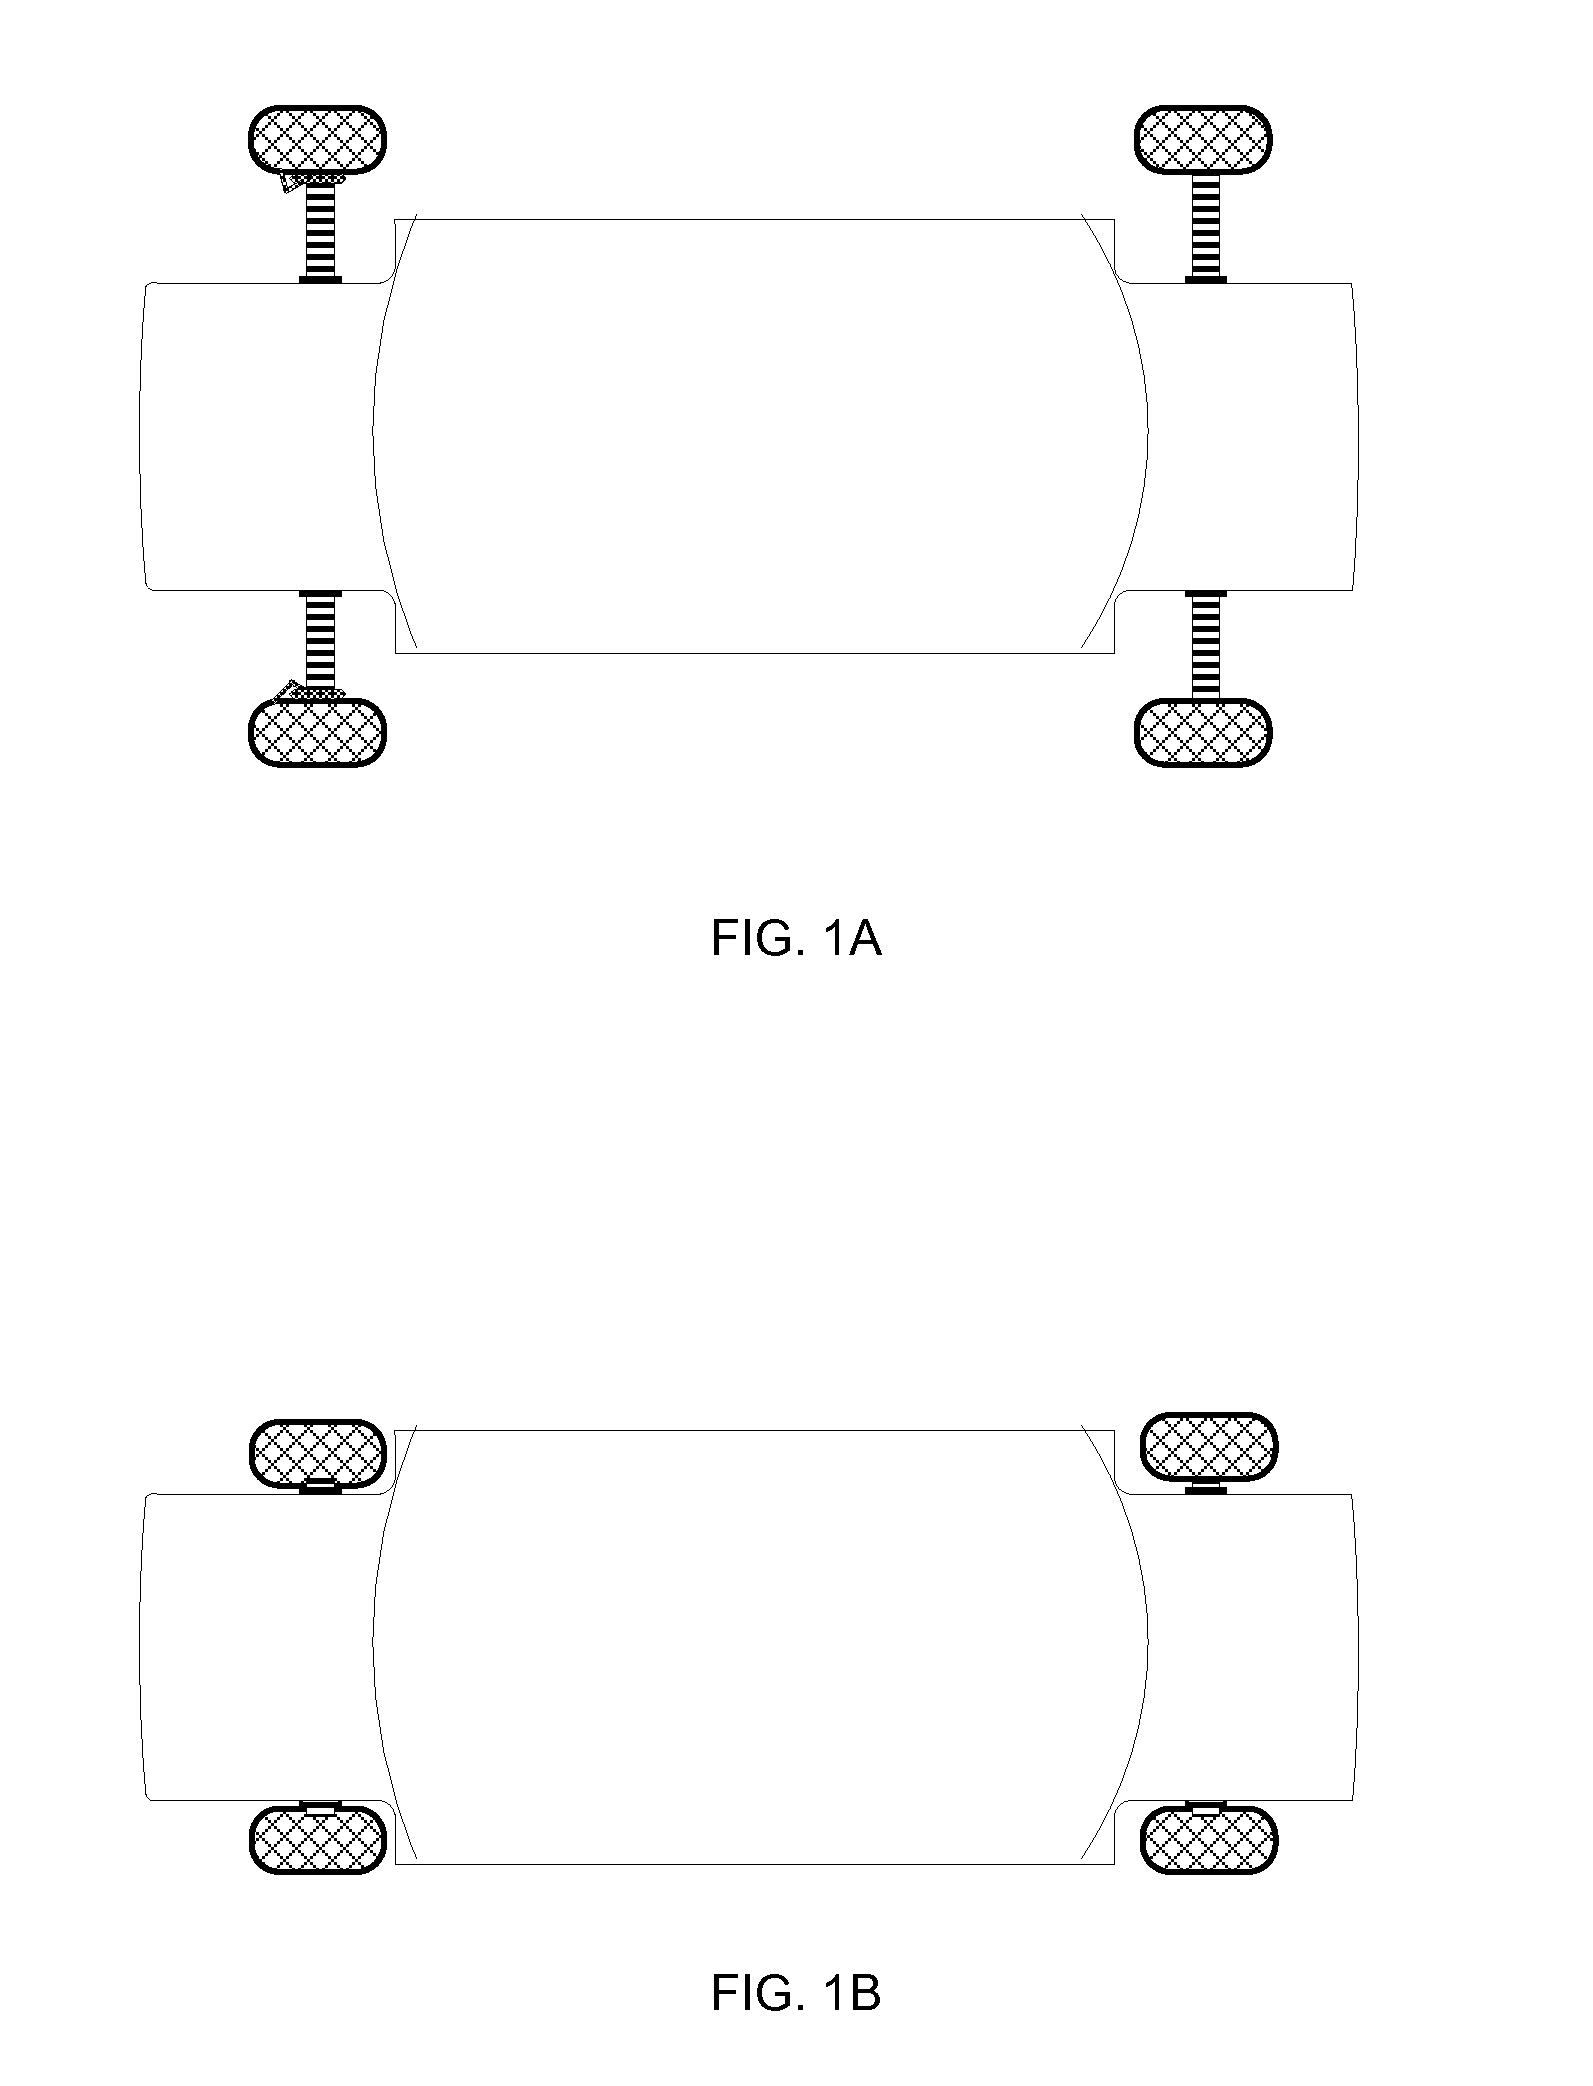 Vehicle with wheel and axle Assembly capable of changing track width during driving mode